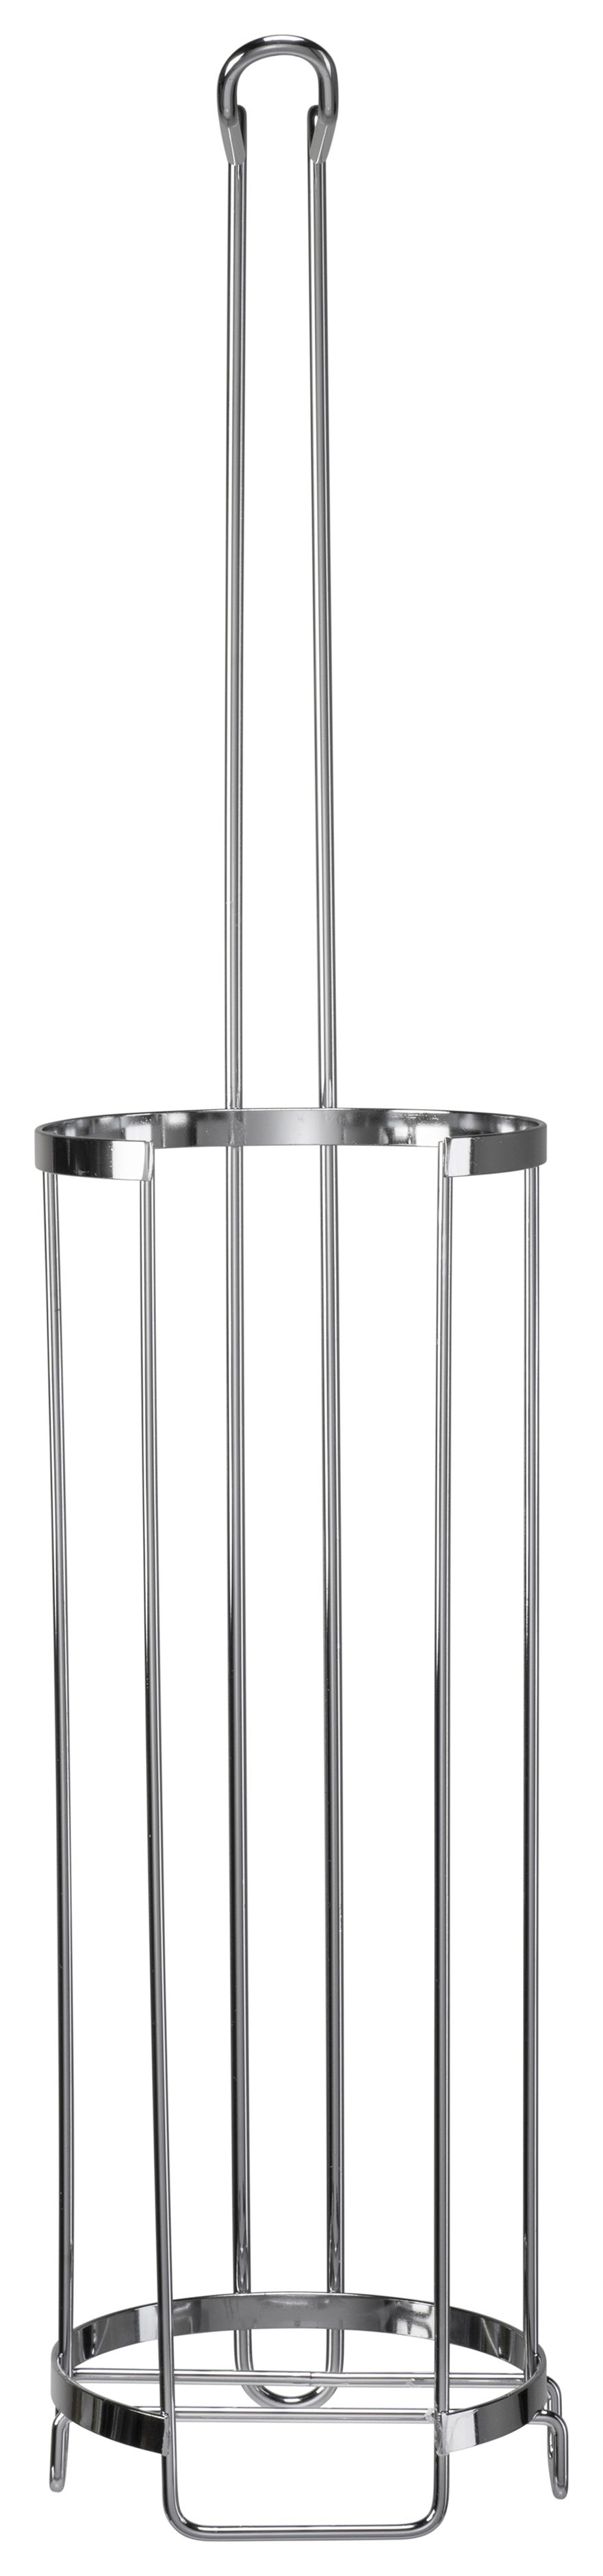 Image of Croydex Rust Free Toilet Roll Caddy - Chrome